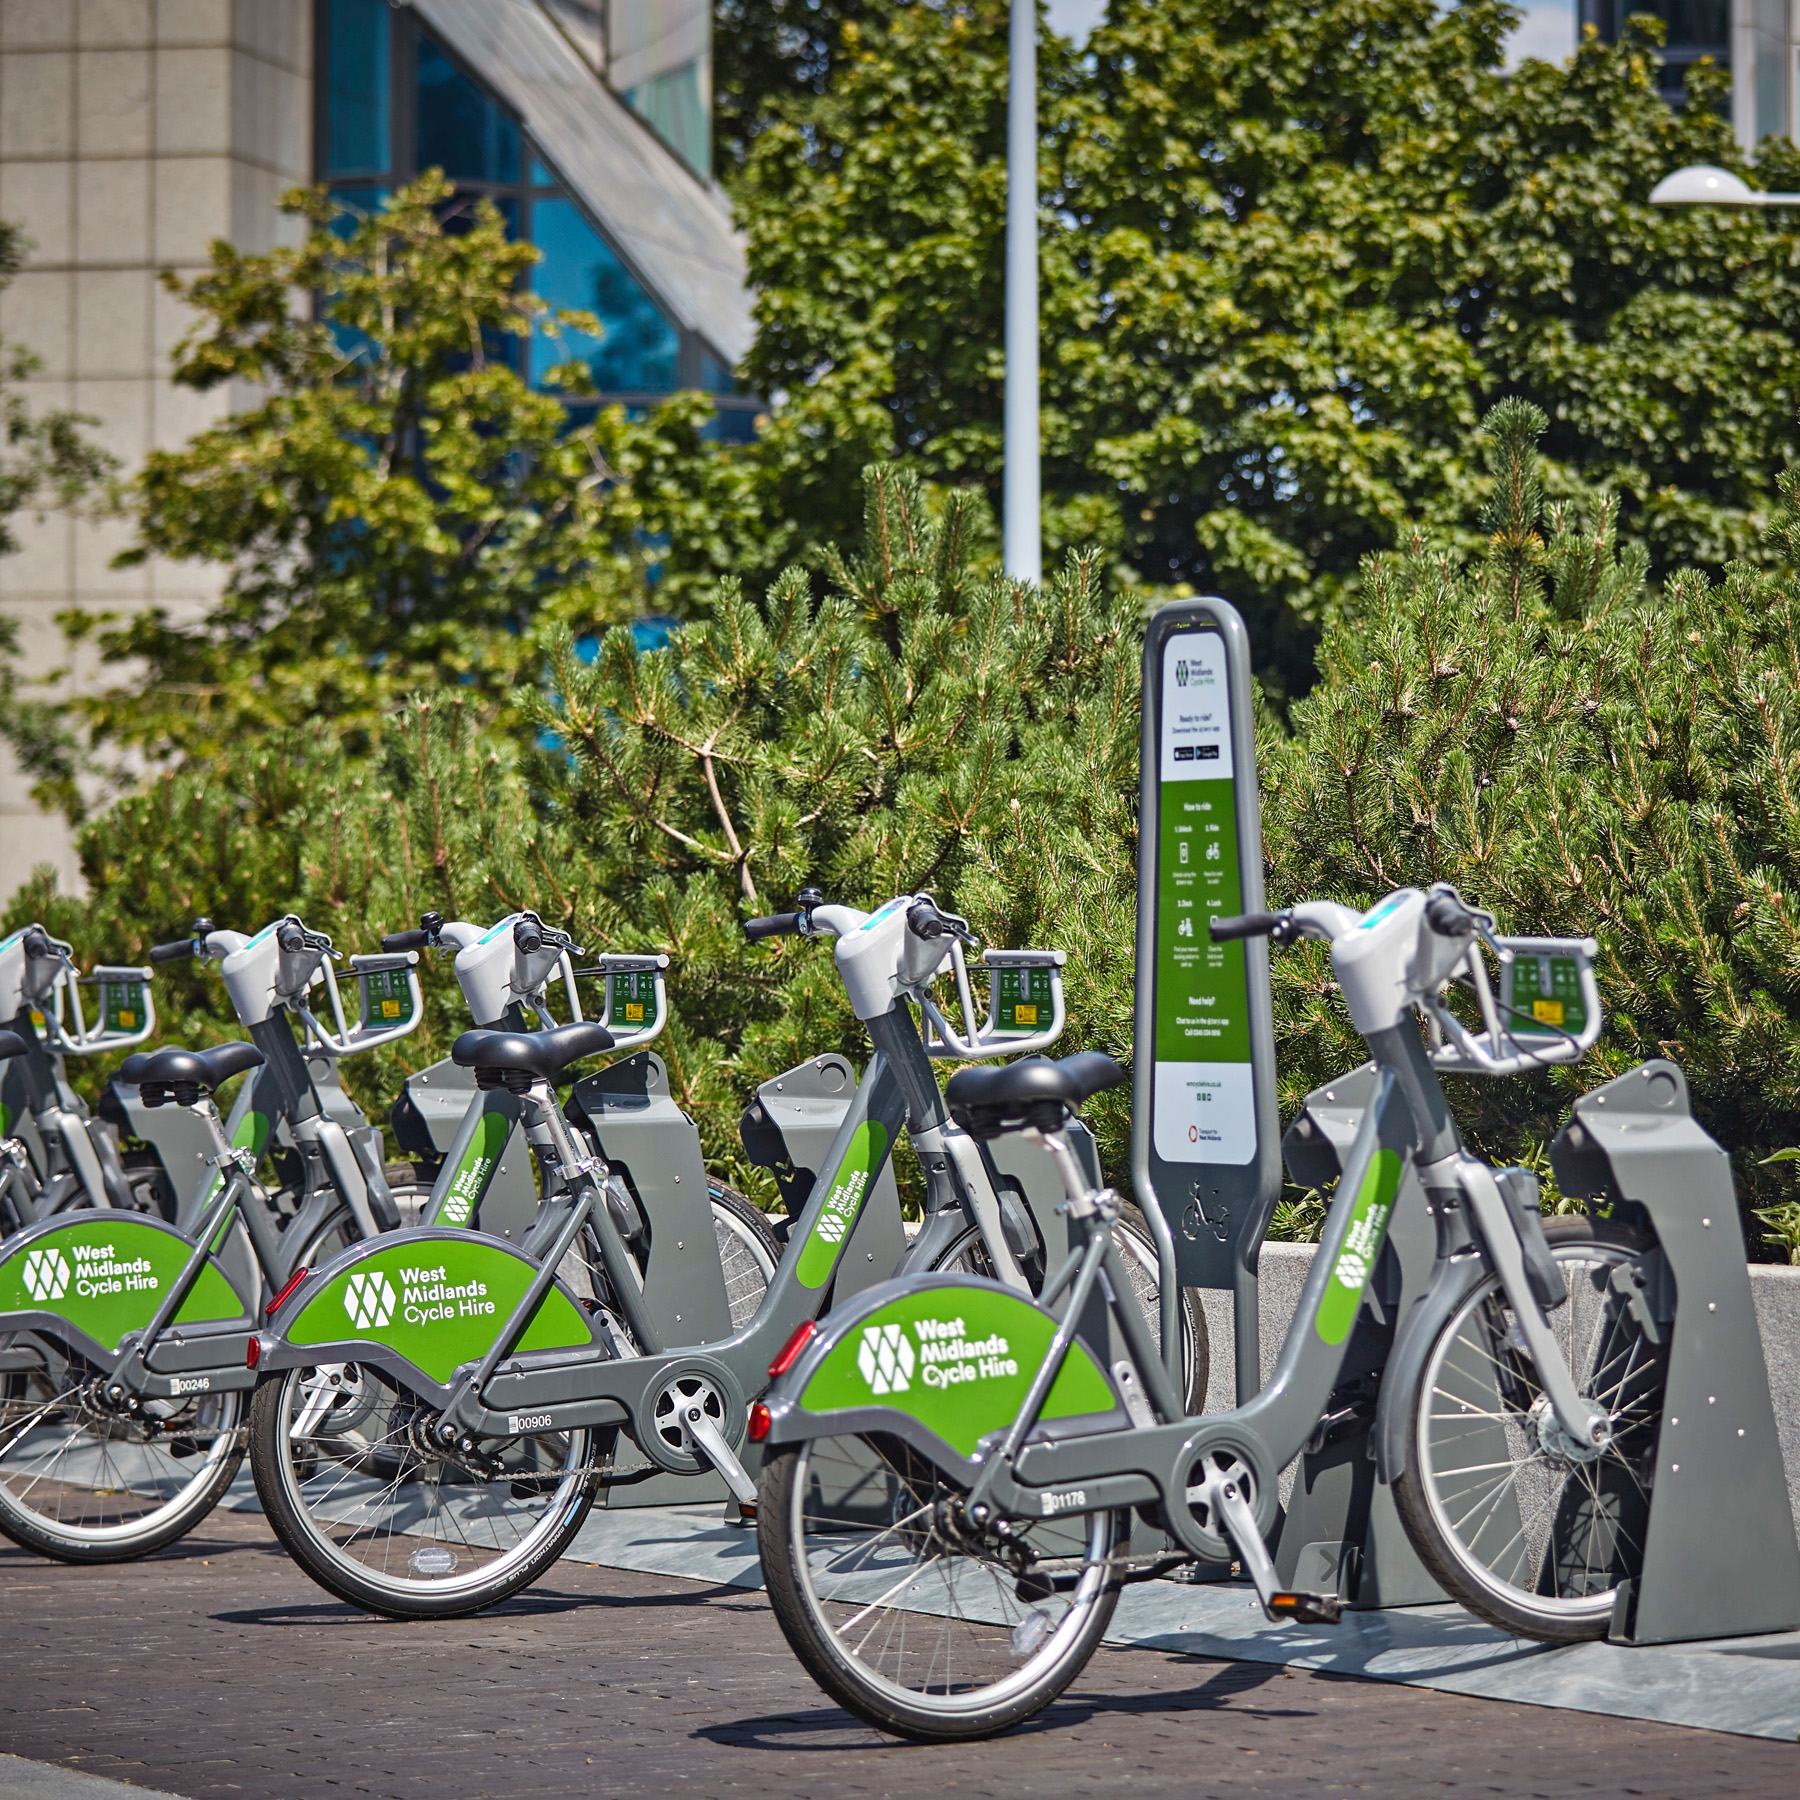 West Midlands Cycle Hire bikes available in Coventry.